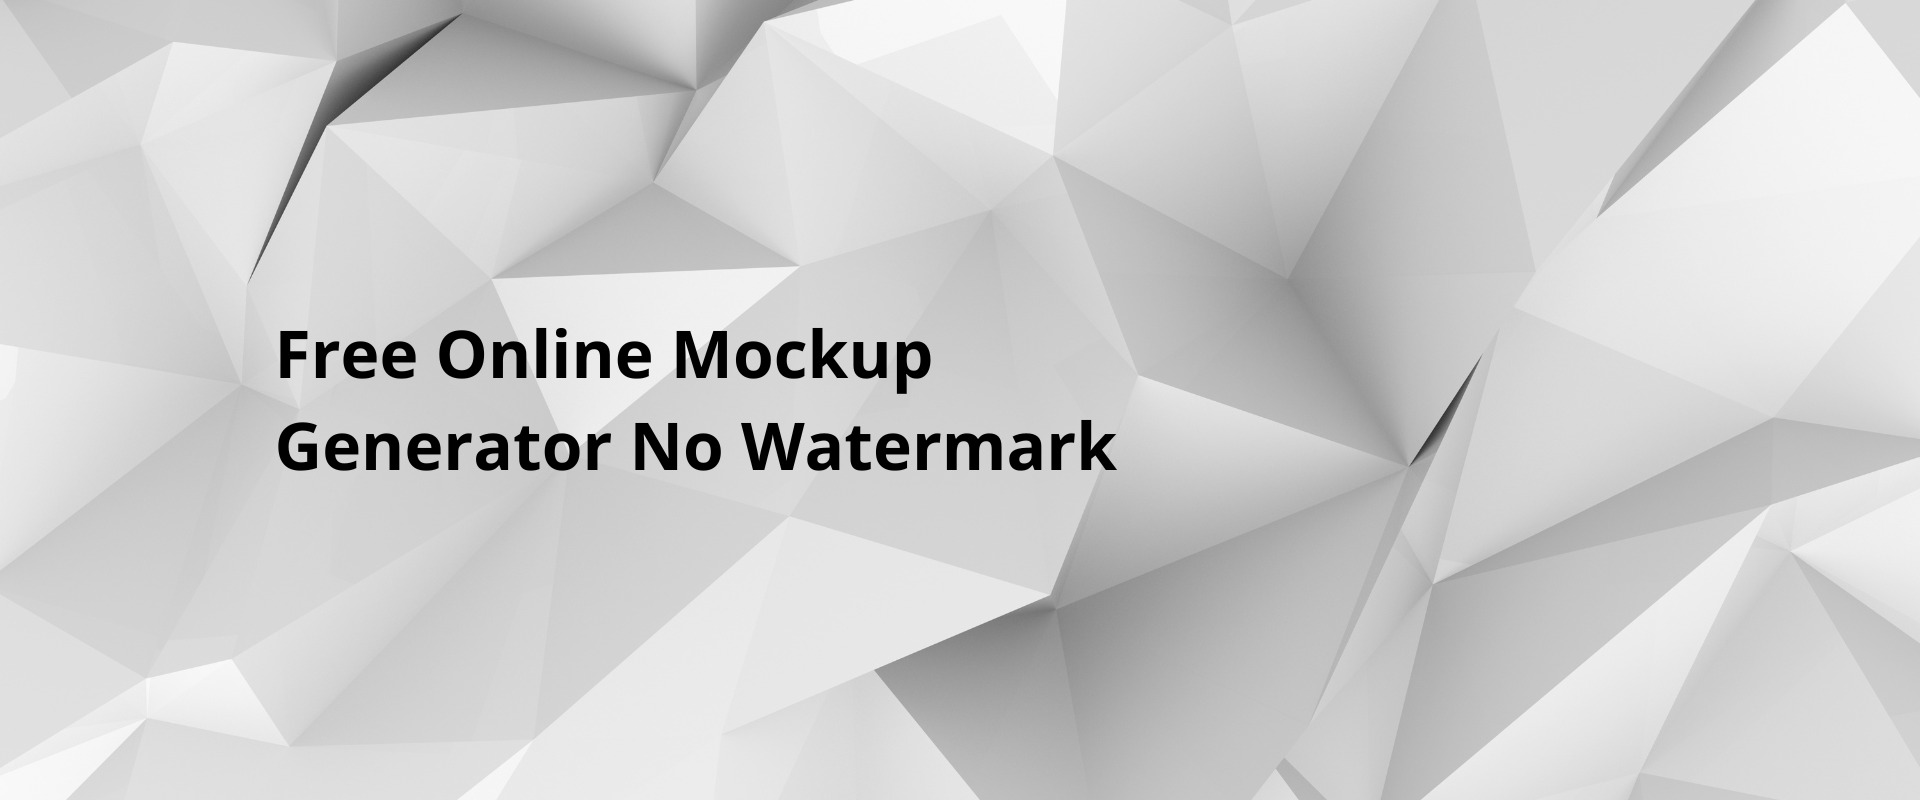 Free Online Mockup Generator No Watermark – 5 Steps Guide To Use It